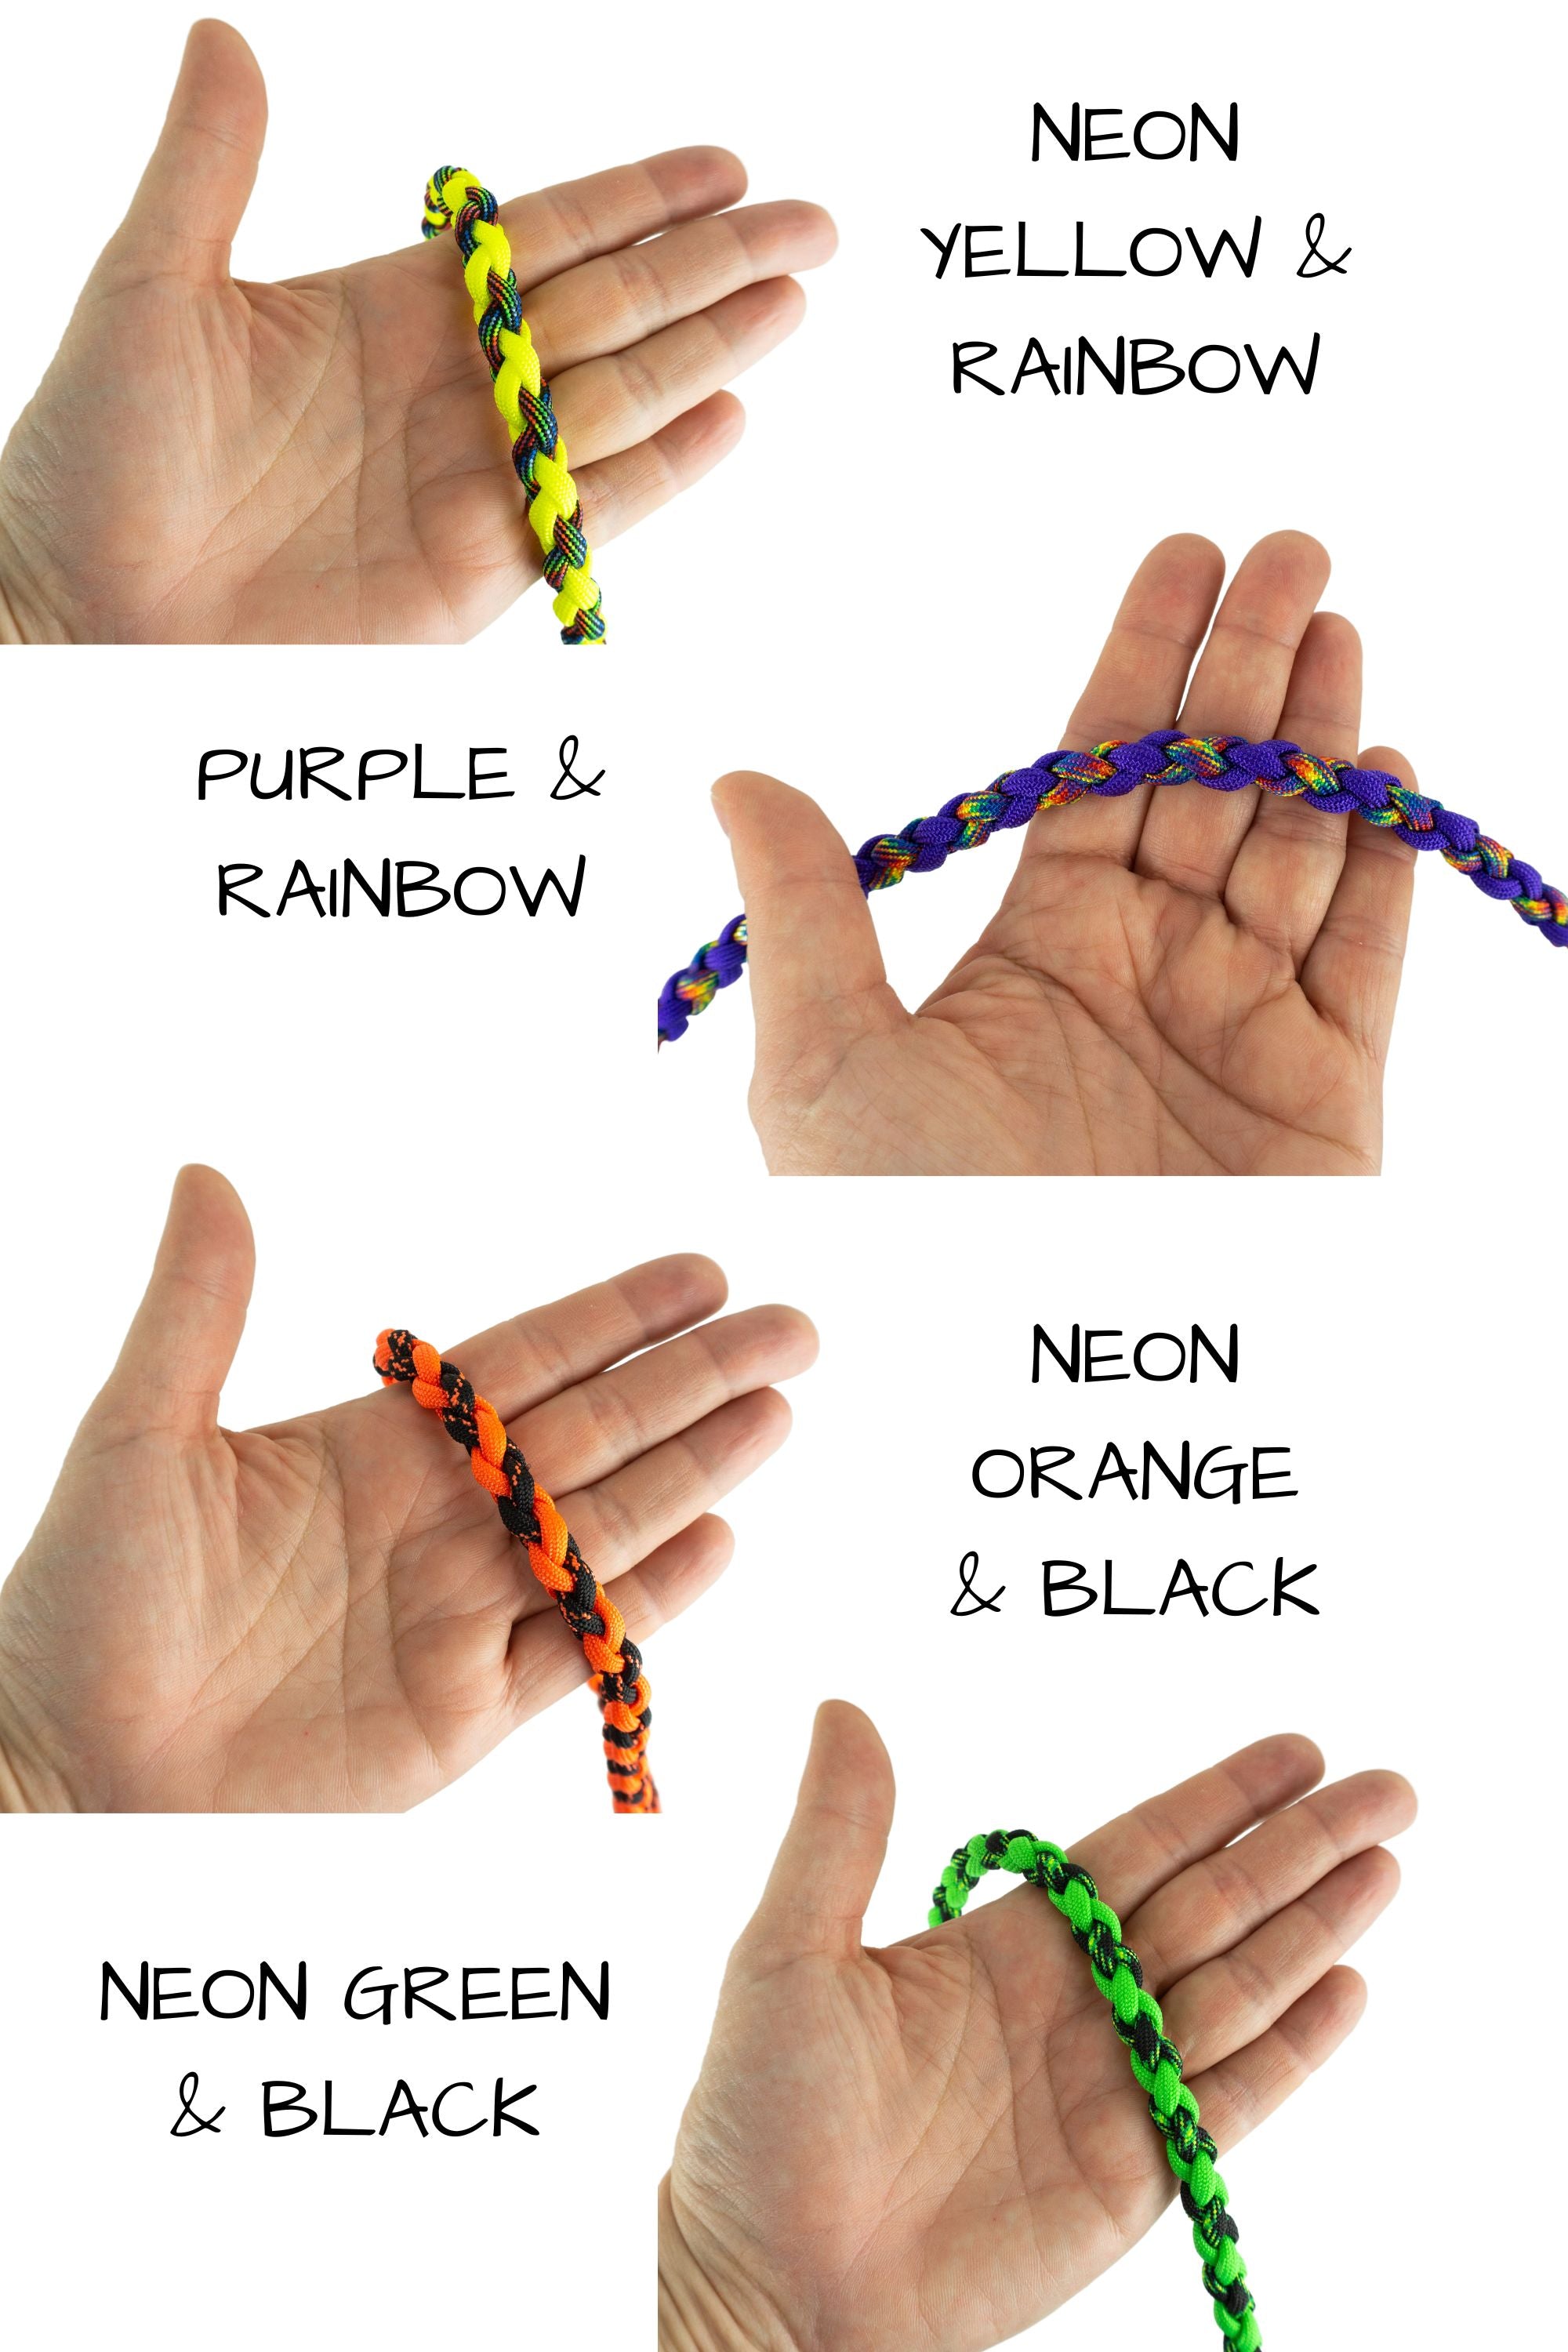 color samples of paracord braid shown for scale in the palm of a hand. Colors shown here are neon yellow and rainbow, purple and rainbow, neon orange and black, or neon green and black.